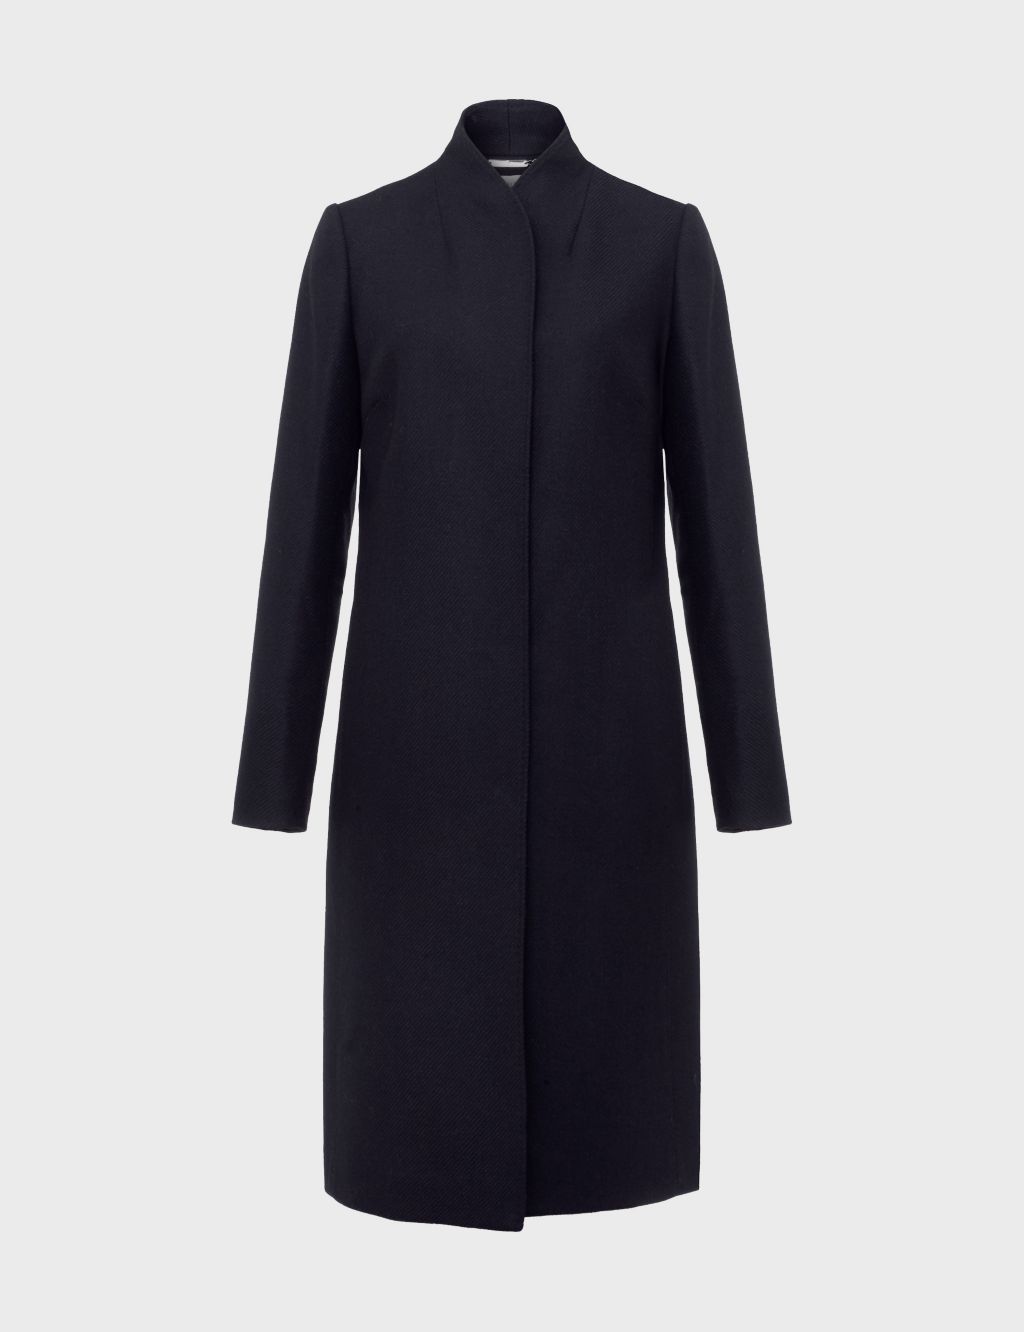 Wool Rich High Neck Tailored Coat image 2